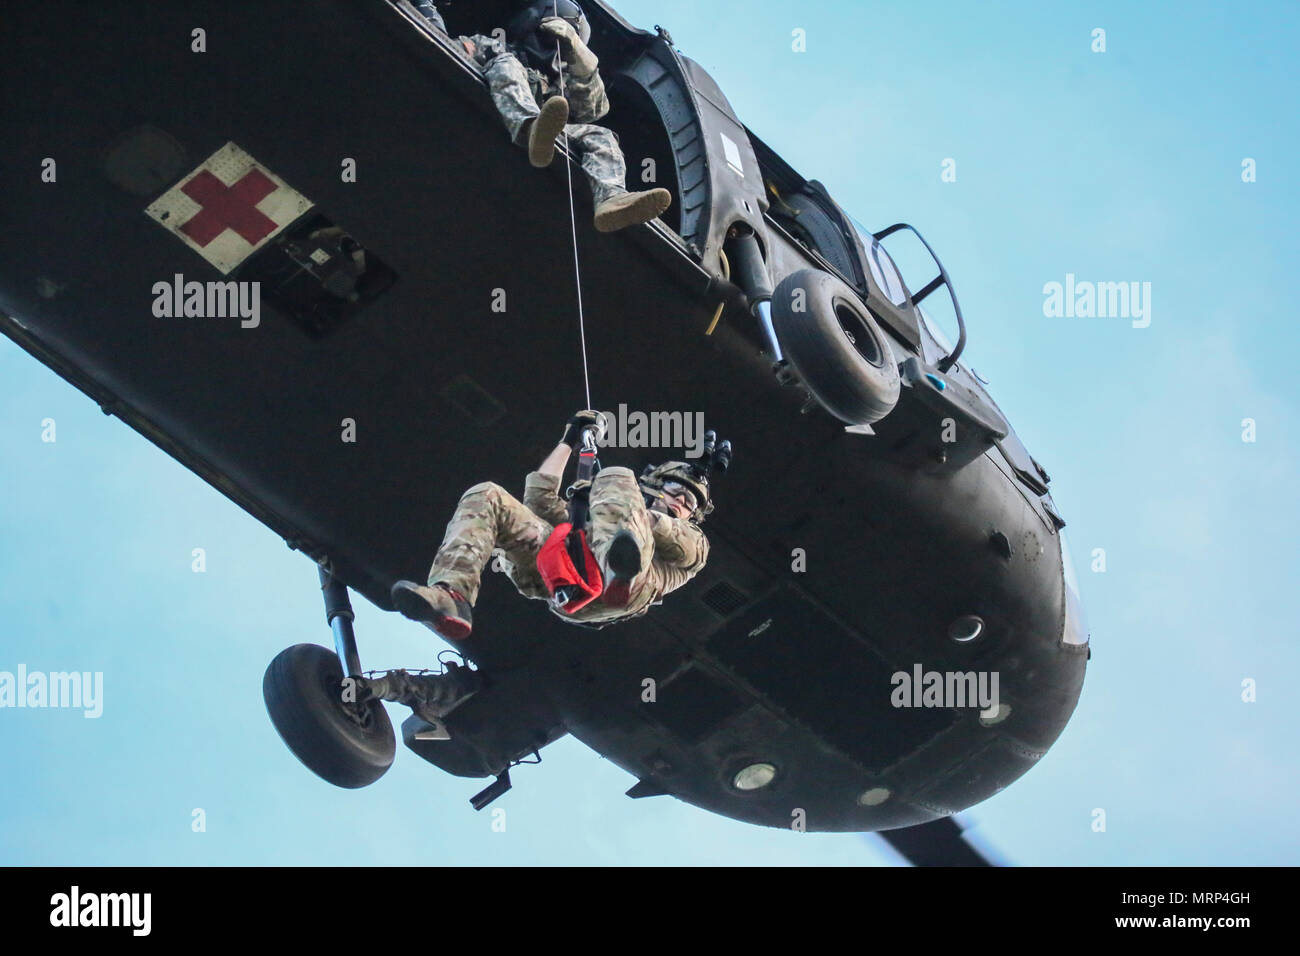 U.S. Air National Guard Senior Airman Michael Curley descends from a UH-60 Black Hawk helicopter during joint training for New Jersey Task Force One at Joint Base McGuire-Dix-Lakehurst, N.J., June 28, 2017. The primary mission of New Jersey Task Force One is to provide advanced technical search and rescue capabilities to victims trapped or entombed in structurally collapsed buildings. Task Force One is made up of New Jersey National Guard Soldiers and Airmen, as well as civilians. (U.S. Air National Guard photo by Master Sgt. Matt Hecht/Released) Stock Photo